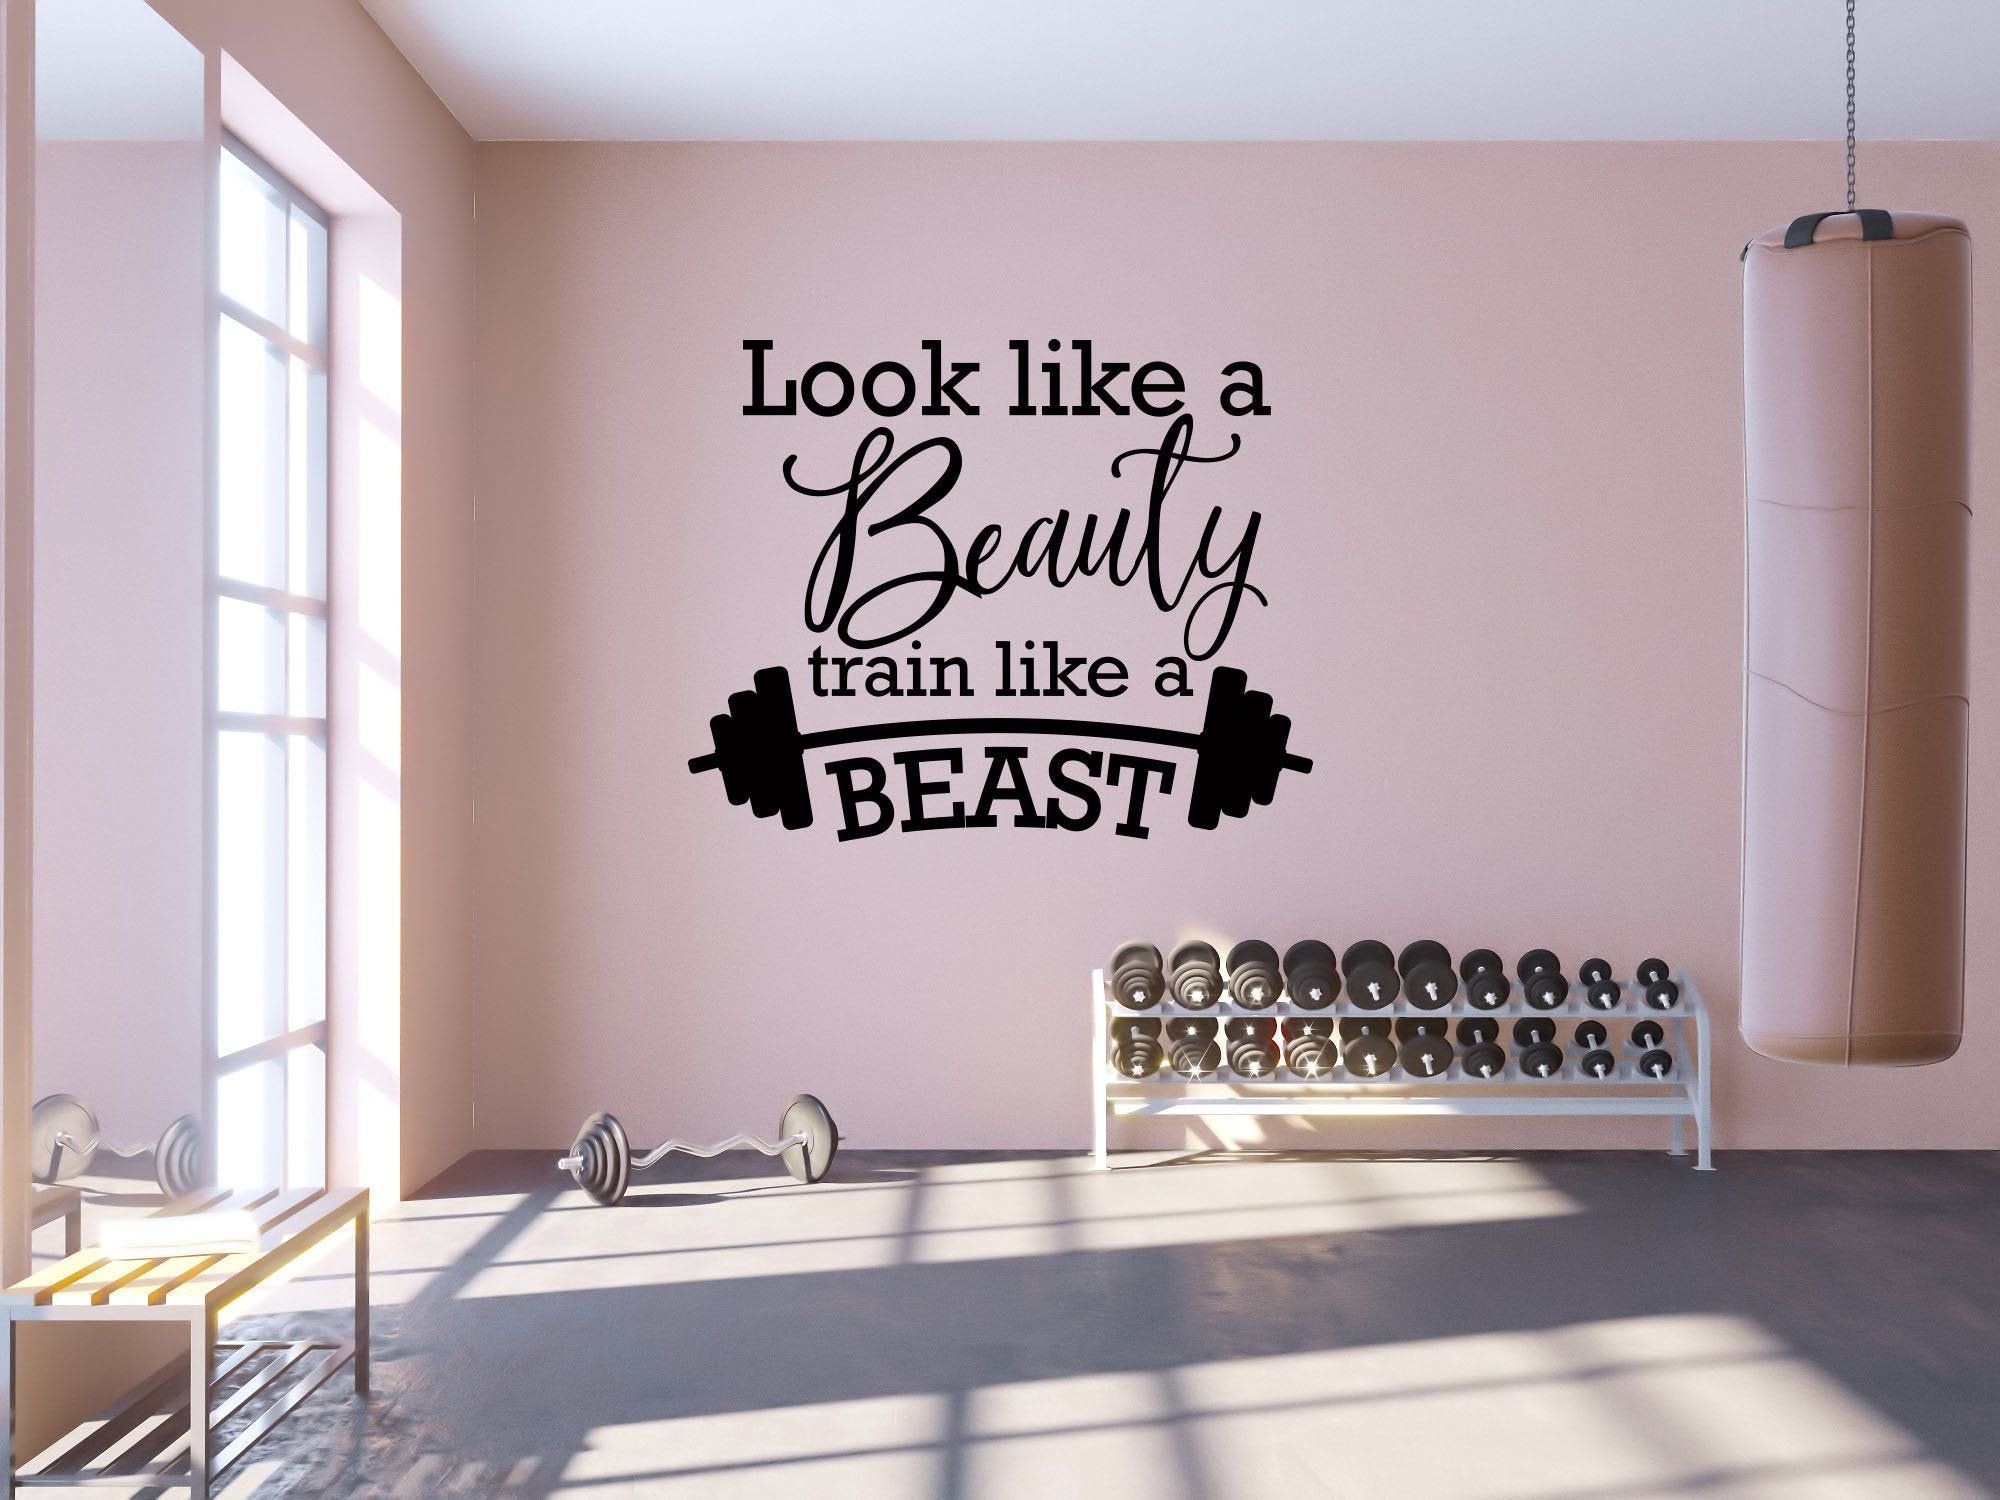 16 fitness Room signs ideas